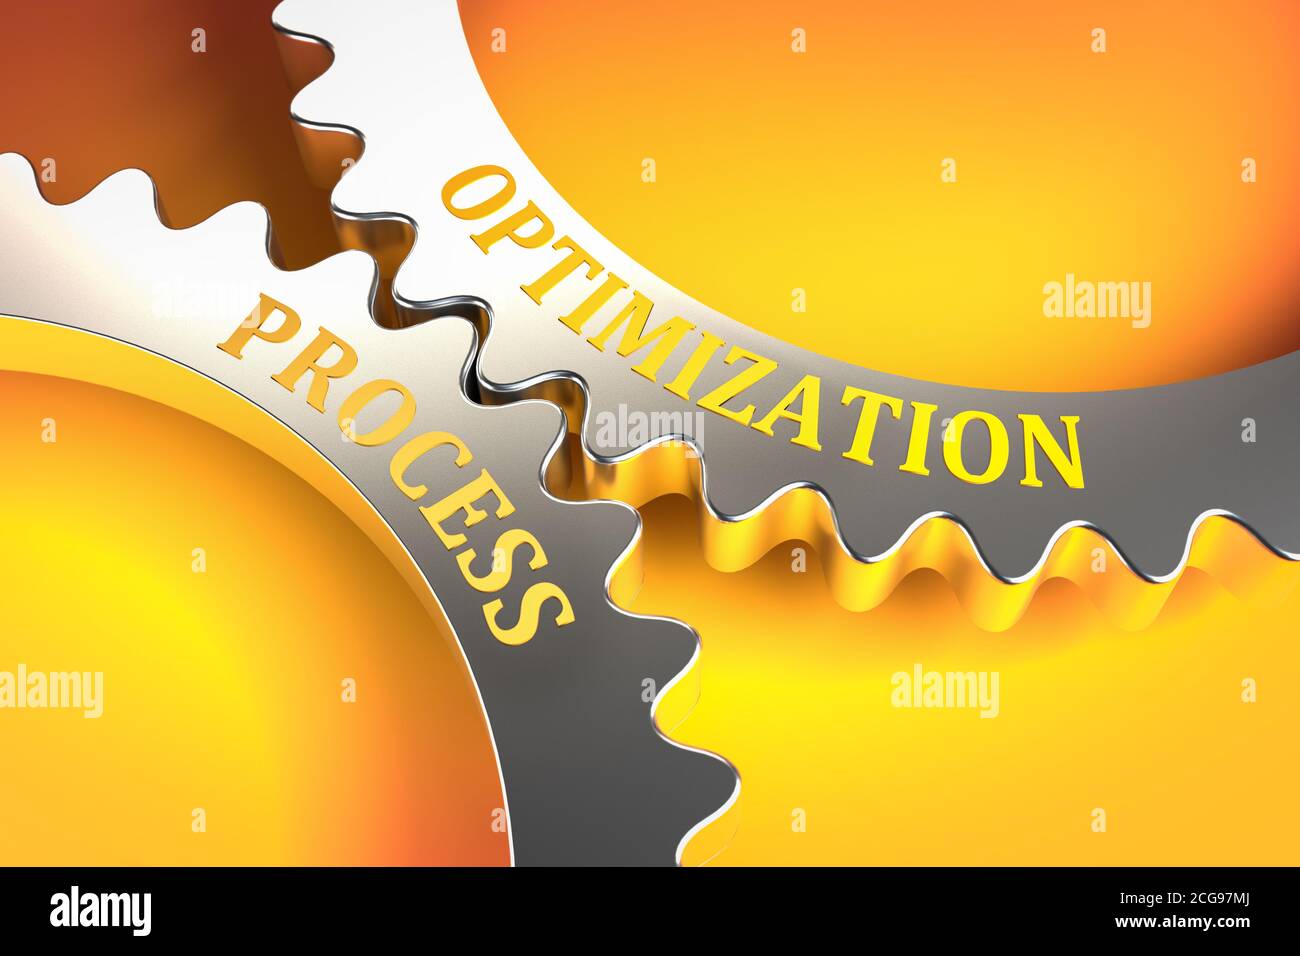 Business Concept: Process Optimization. Gears fitting into each other. Metaphor Stock Photo